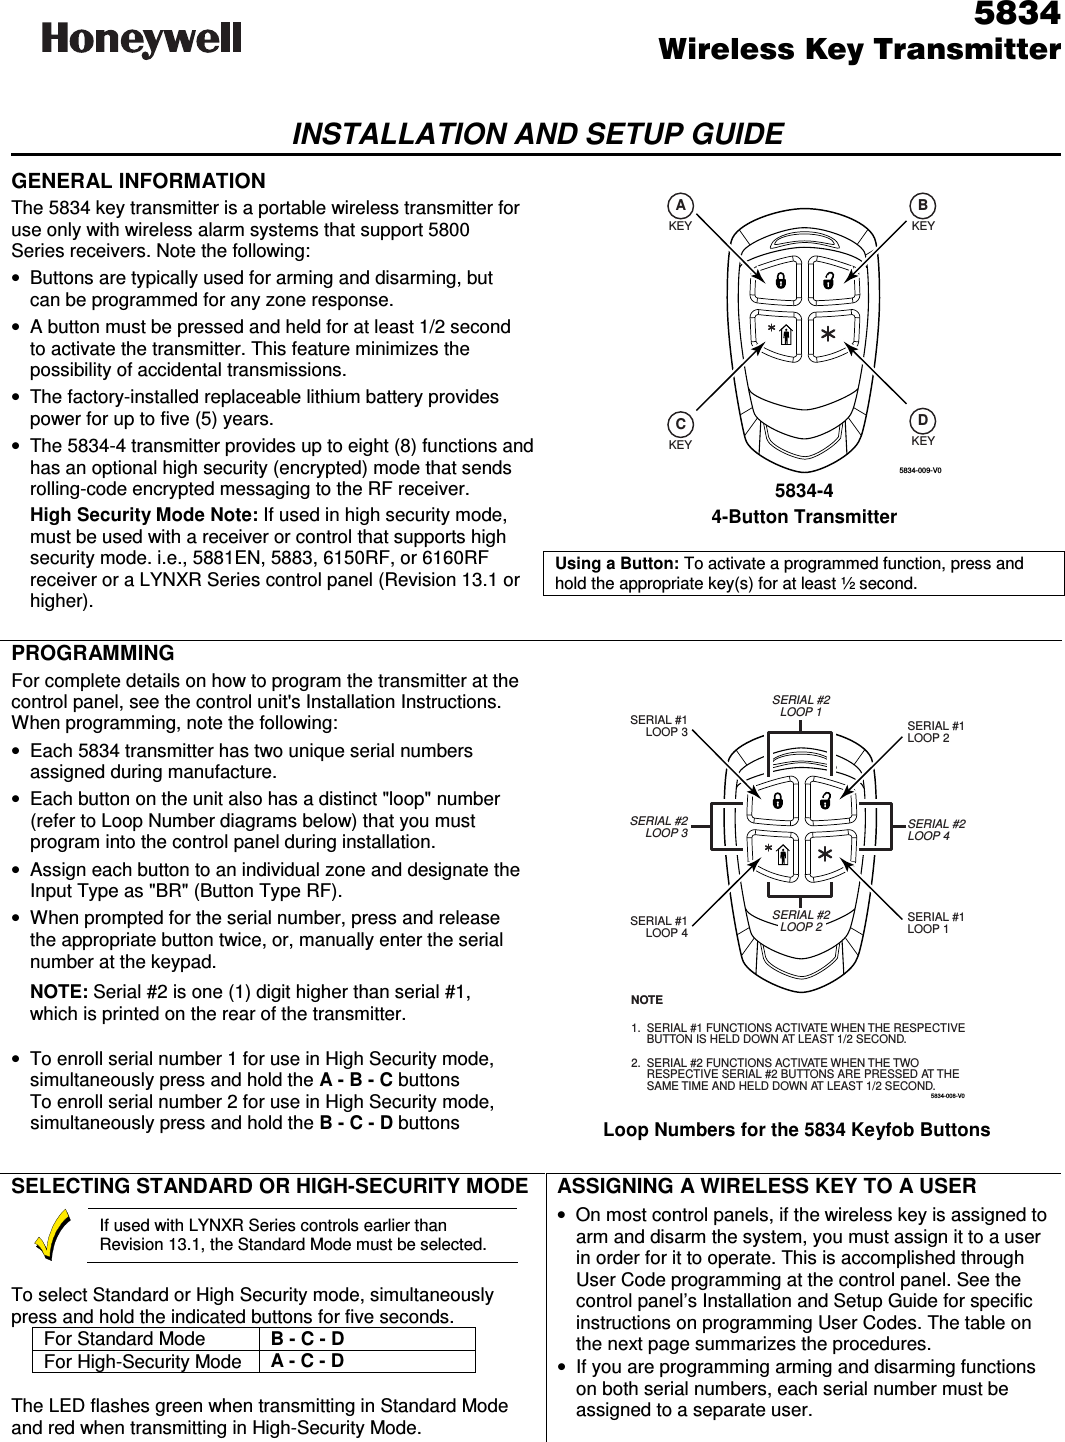    5834 Wireless Key TransmitterINSTALLATION AND SETUP GUIDE  GENERAL INFORMATION The 5834 key transmitter is a portable wireless transmitter for use only with wireless alarm systems that support 5800 Series receivers. Note the following:  •  Buttons are typically used for arming and disarming, but can be programmed for any zone response. •  A button must be pressed and held for at least 1/2 second to activate the transmitter. This feature minimizes the possibility of accidental transmissions. •  The factory-installed replaceable lithium battery provides power for up to five (5) years. •  The 5834-4 transmitter provides up to eight (8) functions and has an optional high security (encrypted) mode that sends rolling-code encrypted messaging to the RF receiver.   High Security Mode Note: If used in high security mode, must be used with a receiver or control that supports high security mode. i.e., 5881EN, 5883, 6150RF, or 6160RF receiver or a LYNXR Series control panel (Revision 13.1 or higher).  5834-009-V0KEY KEYKEY KEYACBD 5834-4 4-Button Transmitter  Using a Button: To activate a programmed function, press and hold the appropriate key(s) for at least ½ second.      PROGRAMMING For complete details on how to program the transmitter at the control panel, see the control unit&apos;s Installation Instructions. When programming, note the following: •  Each 5834 transmitter has two unique serial numbers assigned during manufacture.  •  Each button on the unit also has a distinct &quot;loop&quot; number (refer to Loop Number diagrams below) that you must program into the control panel during installation. •  Assign each button to an individual zone and designate the Input Type as &quot;BR&quot; (Button Type RF). •  When prompted for the serial number, press and release the appropriate button twice, or, manually enter the serial number at the keypad.    NOTE: Serial #2 is one (1) digit higher than serial #1, which is printed on the rear of the transmitter.   •  To enroll serial number 1 for use in High Security mode, simultaneously press and hold the A - B - C buttons   To enroll serial number 2 for use in High Security mode, simultaneously press and hold the B - C - D buttons  5834-008-V0SERIAL #1LOOP 4SERIAL #1LOOP 1SERIAL #2LOOP 1SERIAL #2LOOP 3SERIAL #1LOOP 3SERIAL #2LOOP 4SERIAL #1LOOP 2SERIAL #1 FUNCTIONS ACTIVATE WHEN THE RESPECTIVEBUTTON IS HELD DOWN AT LEAST 1/2 SECOND. SERIAL #2 FUNCTIONS ACTIVATE WHEN THE TWORESPECTIVE SERIAL #2 BUTTONS ARE PRESSED AT THESAME TIME AND HELD DOWN AT LEAST 1/2 SECOND.NOTE1.2.SERIAL #2LOOP 2  Loop Numbers for the 5834 Keyfob Buttons  SELECTING STANDARD OR HIGH-SECURITY MODE   If used with LYNXR Series controls earlier than Revision 13.1, the Standard Mode must be selected.  To select Standard or High Security mode, simultaneously press and hold the indicated buttons for five seconds. For Standard Mode  B - C - D For High-Security Mode  A - C - D  The LED flashes green when transmitting in Standard Mode and red when transmitting in High-Security Mode.  ASSIGNING A WIRELESS KEY TO A USER •  On most control panels, if the wireless key is assigned to arm and disarm the system, you must assign it to a user in order for it to operate. This is accomplished through User Code programming at the control panel. See the control panel’s Installation and Setup Guide for specific instructions on programming User Codes. The table on the next page summarizes the procedures. • If you are programming arming and disarming functions on both serial numbers, each serial number must be assigned to a separate user.    